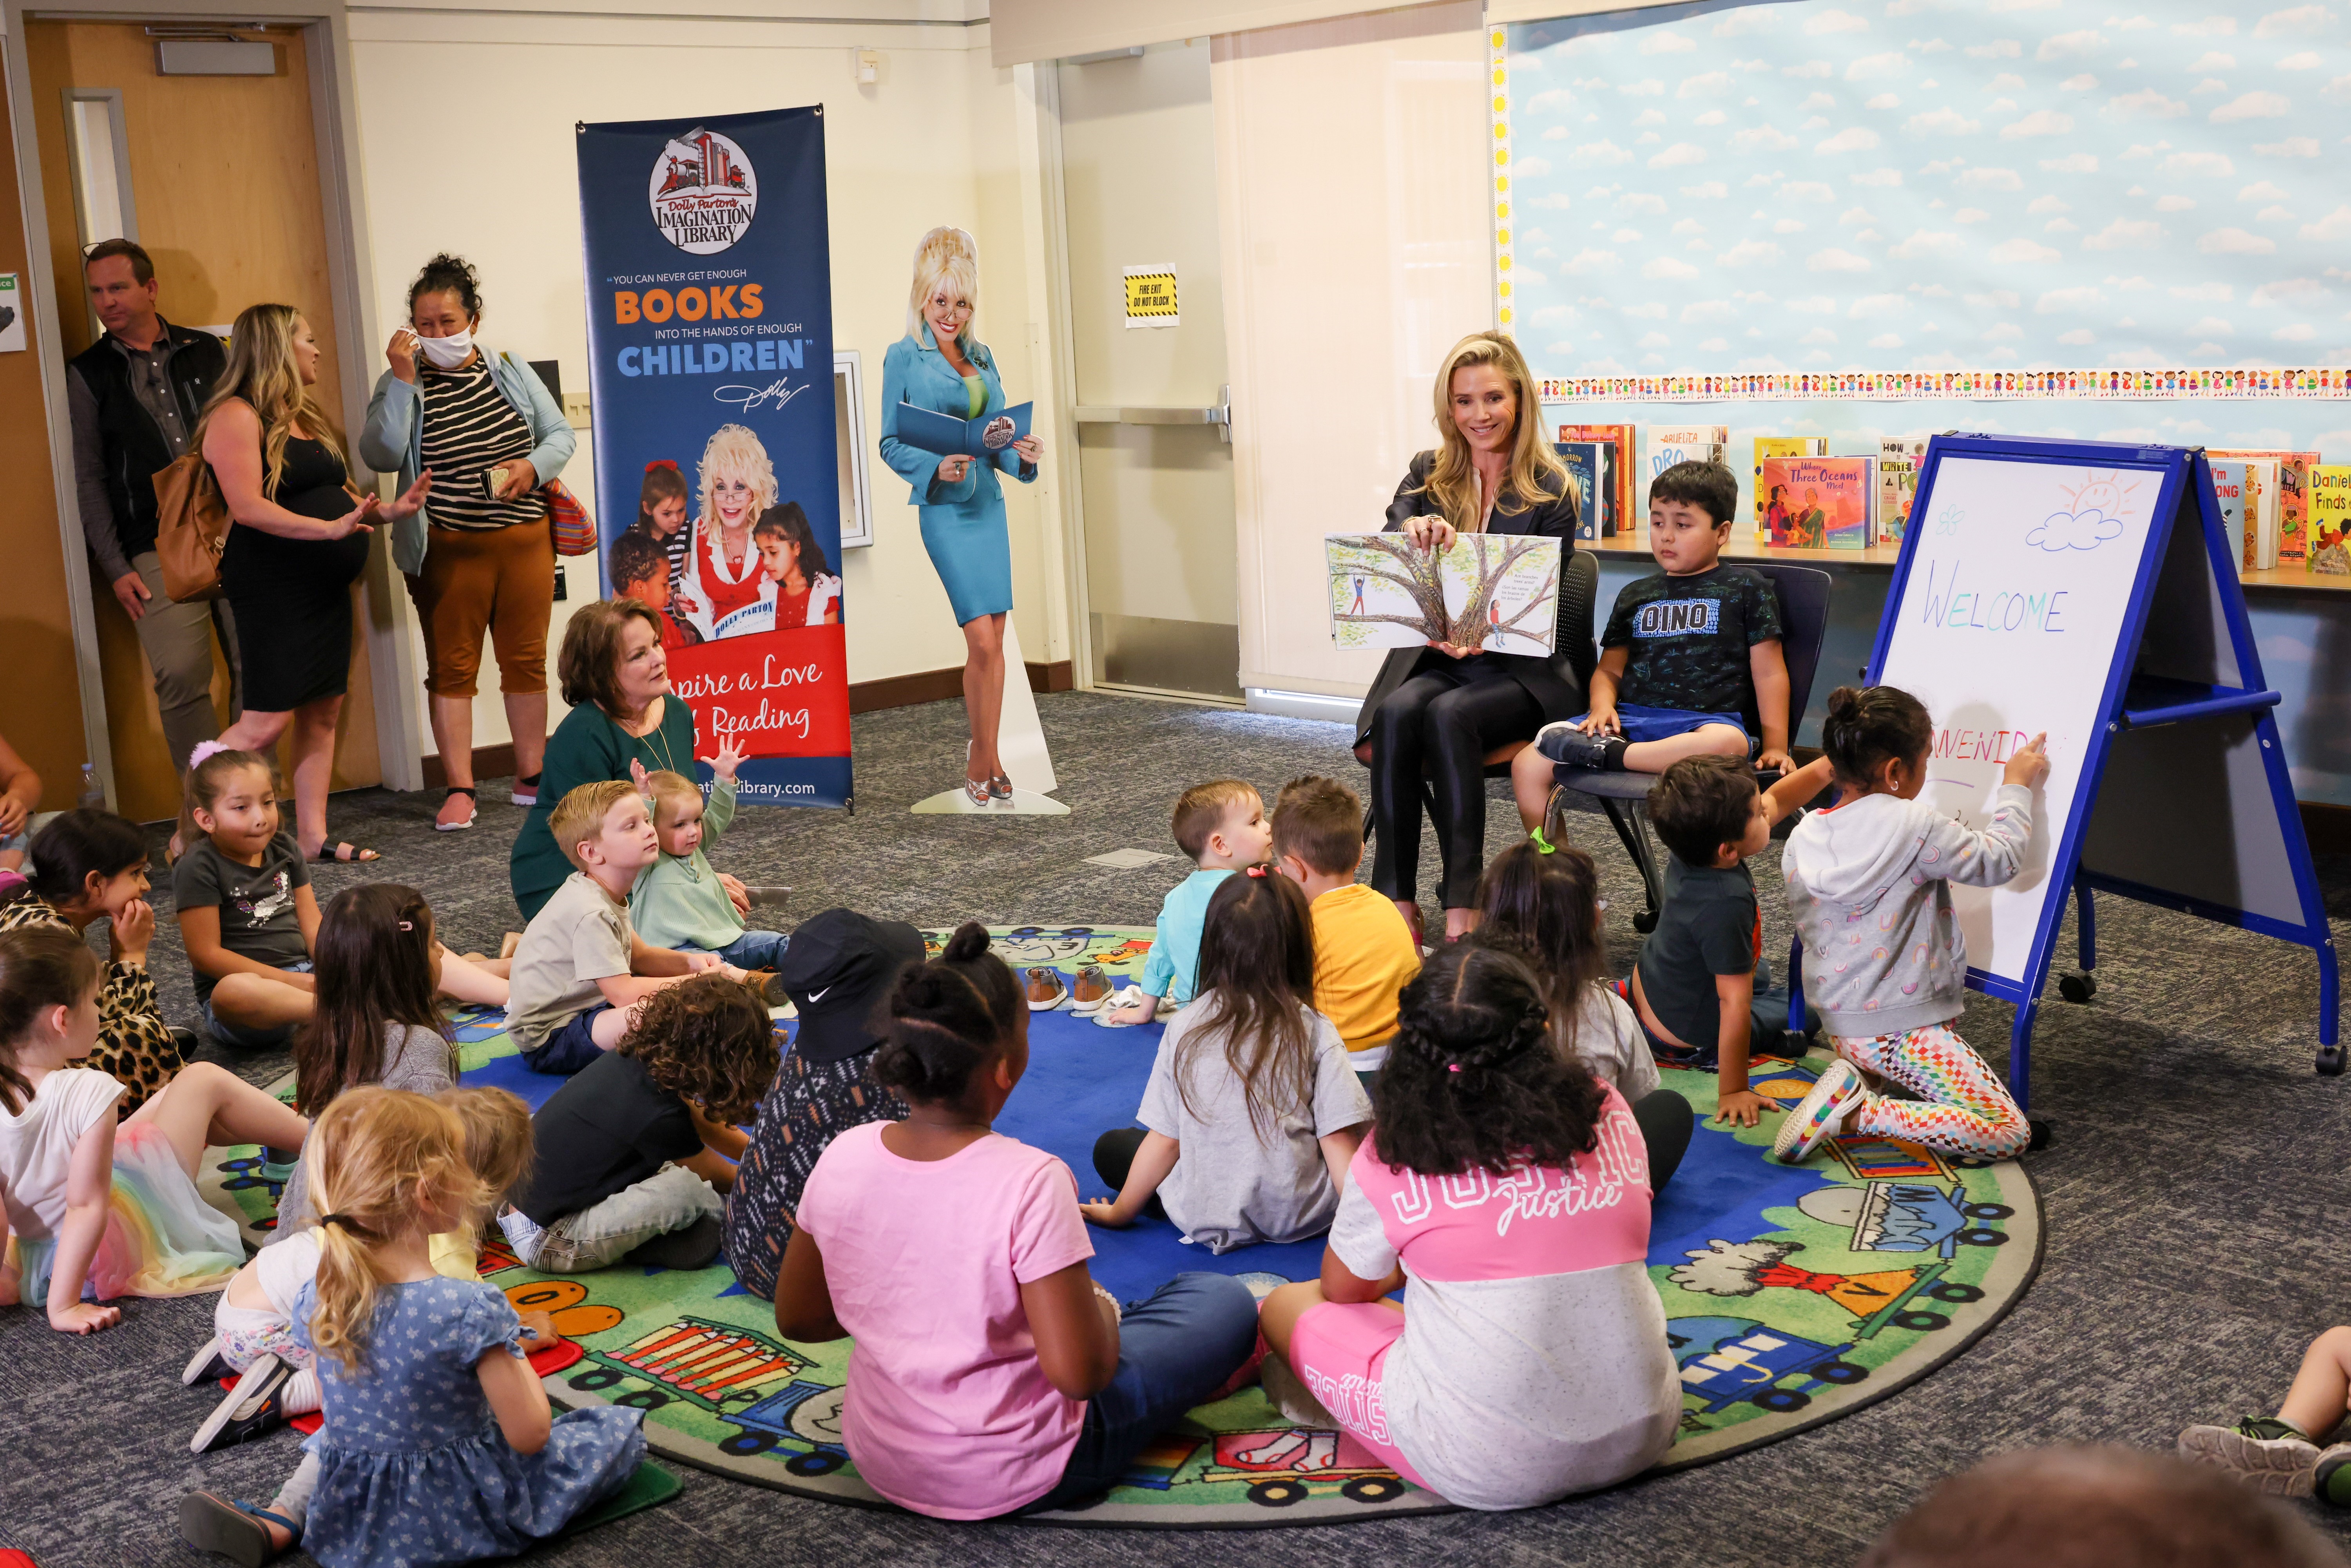 Governor Newsom Announces Statewide Expansion of Dolly Parton’s Imagination Library to Provide Universal Access to Free Books for Young Children